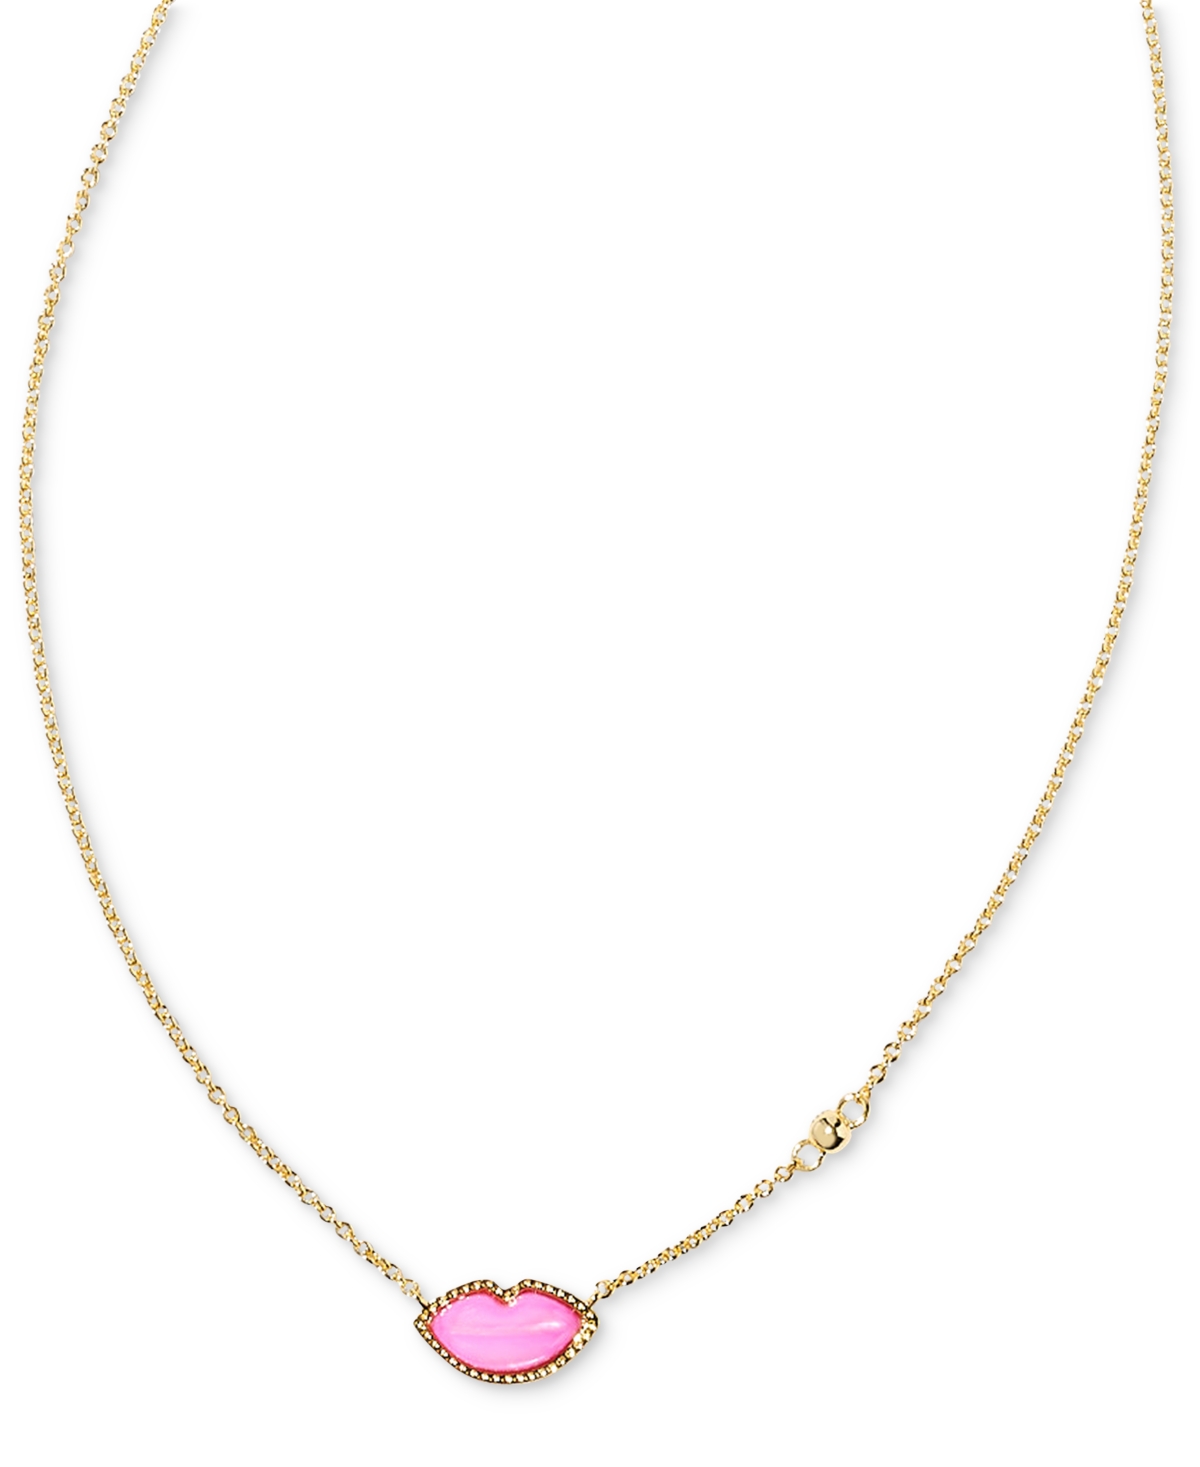 Kendra Scott 14k Gold-plated Gemstone Lips 18" Adjustable Reversible Pendant Necklace In Hot Pink Mother Of Pearl